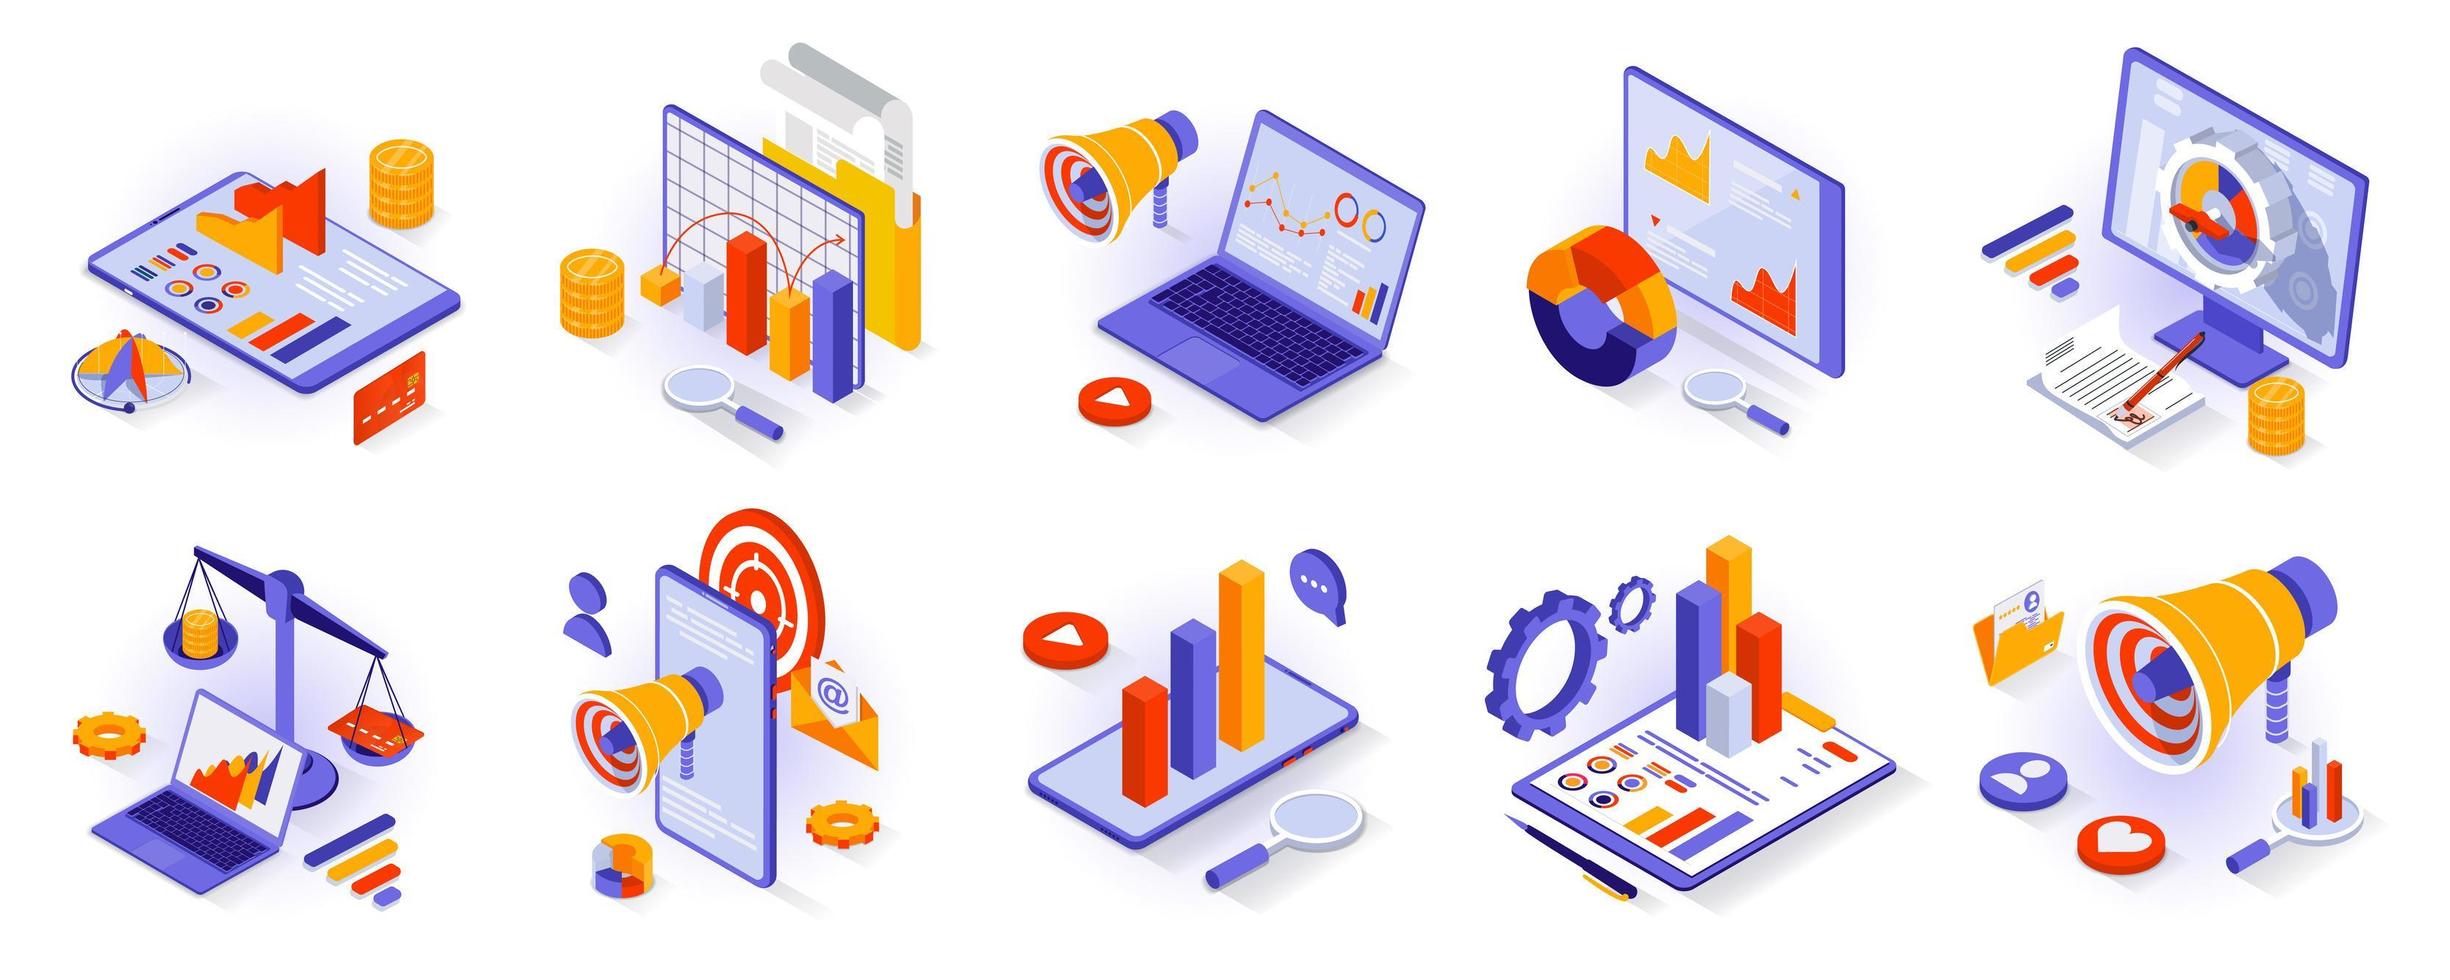 Business and marketing concept isometric 3d icons set. Market research and statistics, data analytics, customer attraction, promotion and advertising isometry isolated collection. Vector illustration